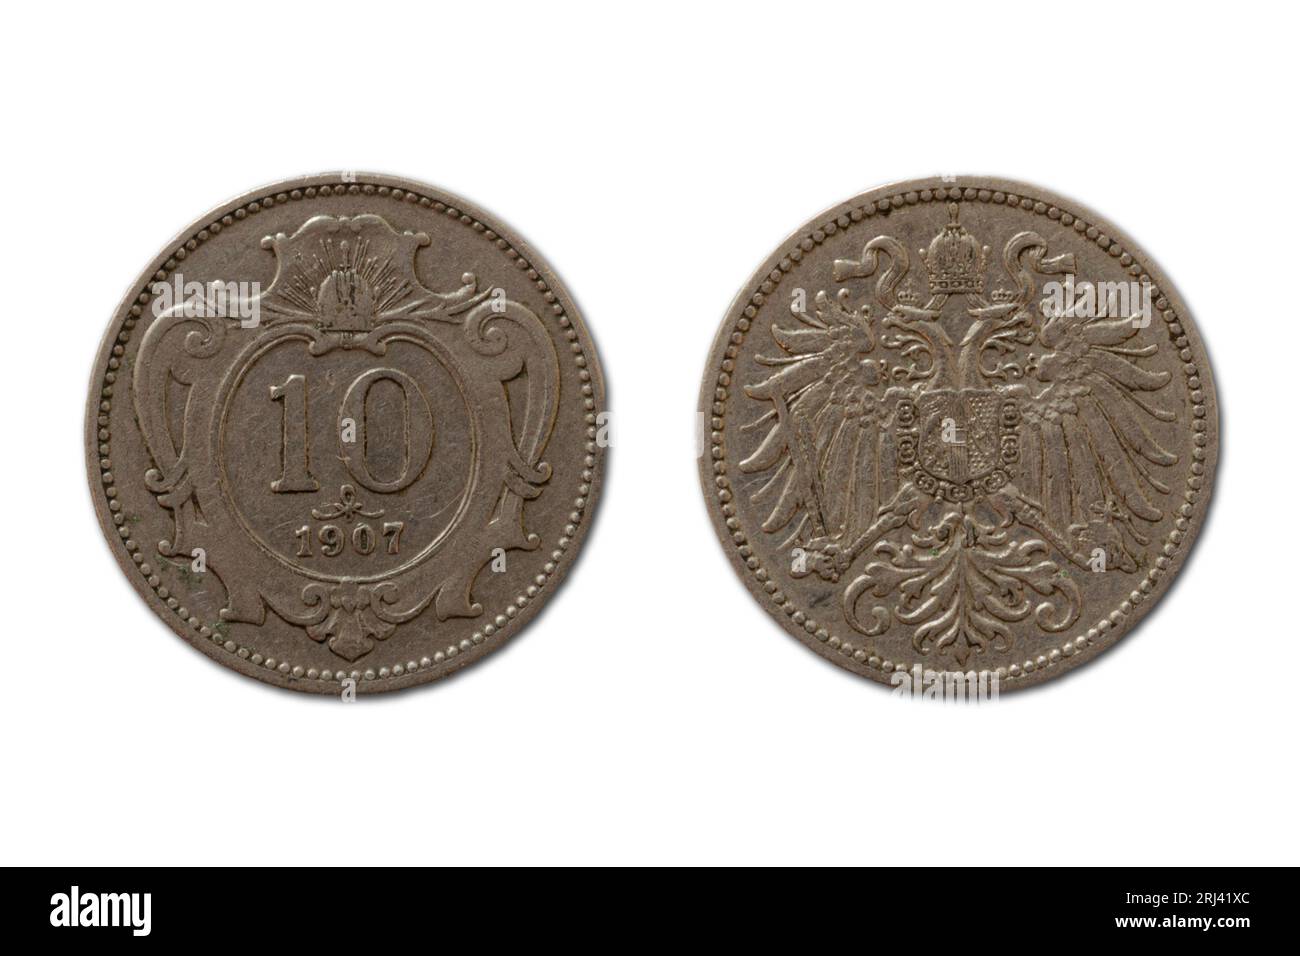 A closeup of two Austro-Hungarian 10 krone coins from 1907 Stock Photo